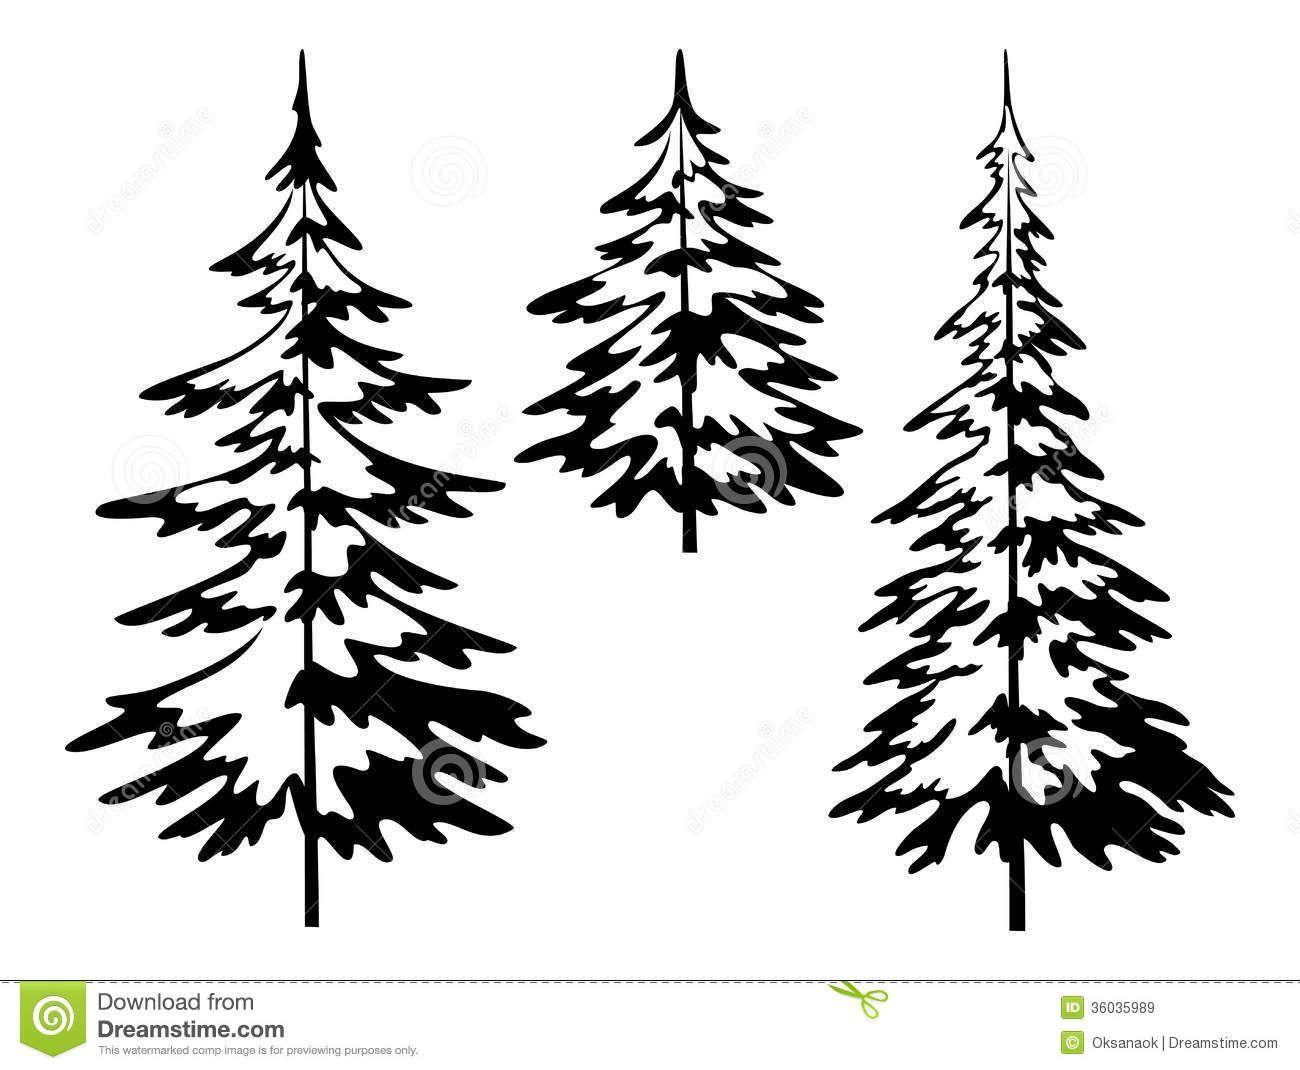 Black and White Pine Tree Logo - Black And White Pine Tree Outline Sketch Coloring Page | I'm gonna ...